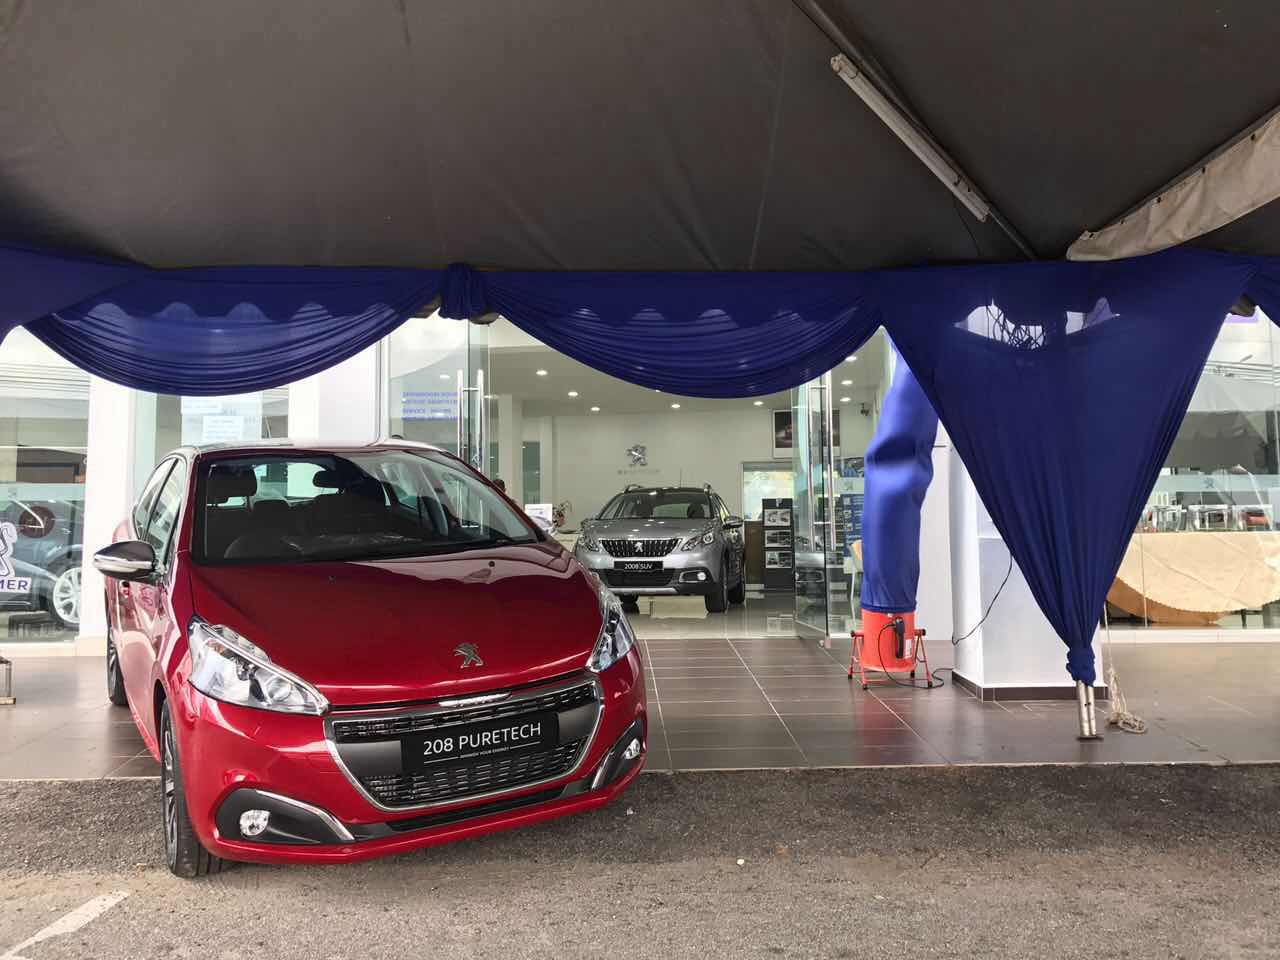 EXCITEMENTG TO LAUNCHING OF PEUGEOT NEW 208 & NEW 2008 PURETECH. CELEBRATION NEW YEAR 2017 & TEST DRIVE EVENT.